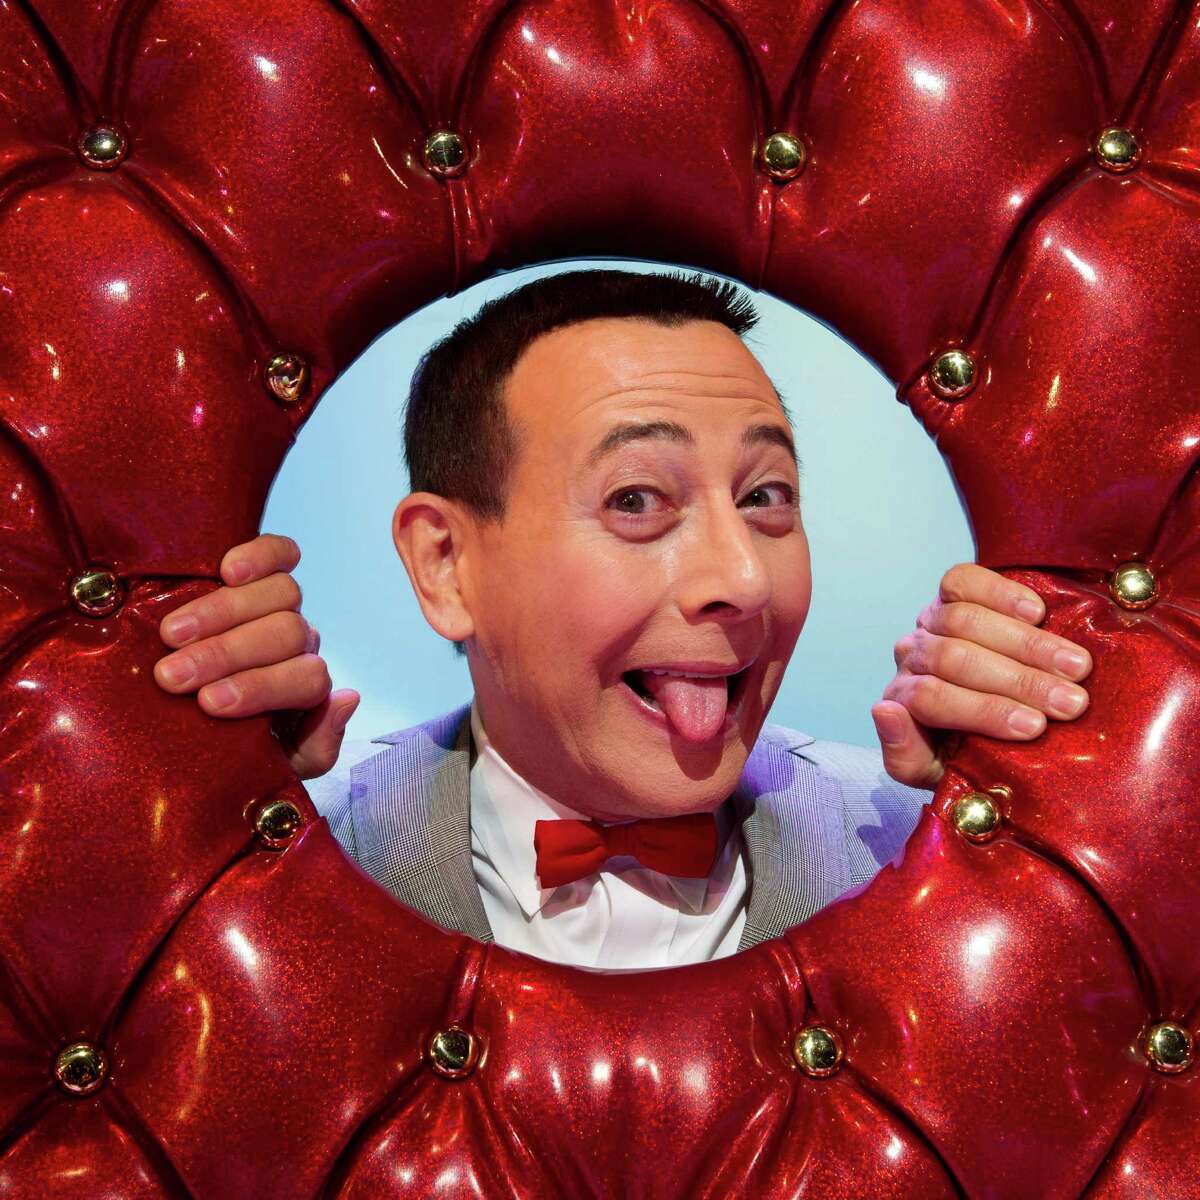 In this Friday, Oct. 29, 2010 photo, Paul Reubens, in character as Pee-wee Herman, poses on stage after a performance of "The Pee-wee Herman Show" on Broadway in New York. (AP Photo/Charles Sykes)